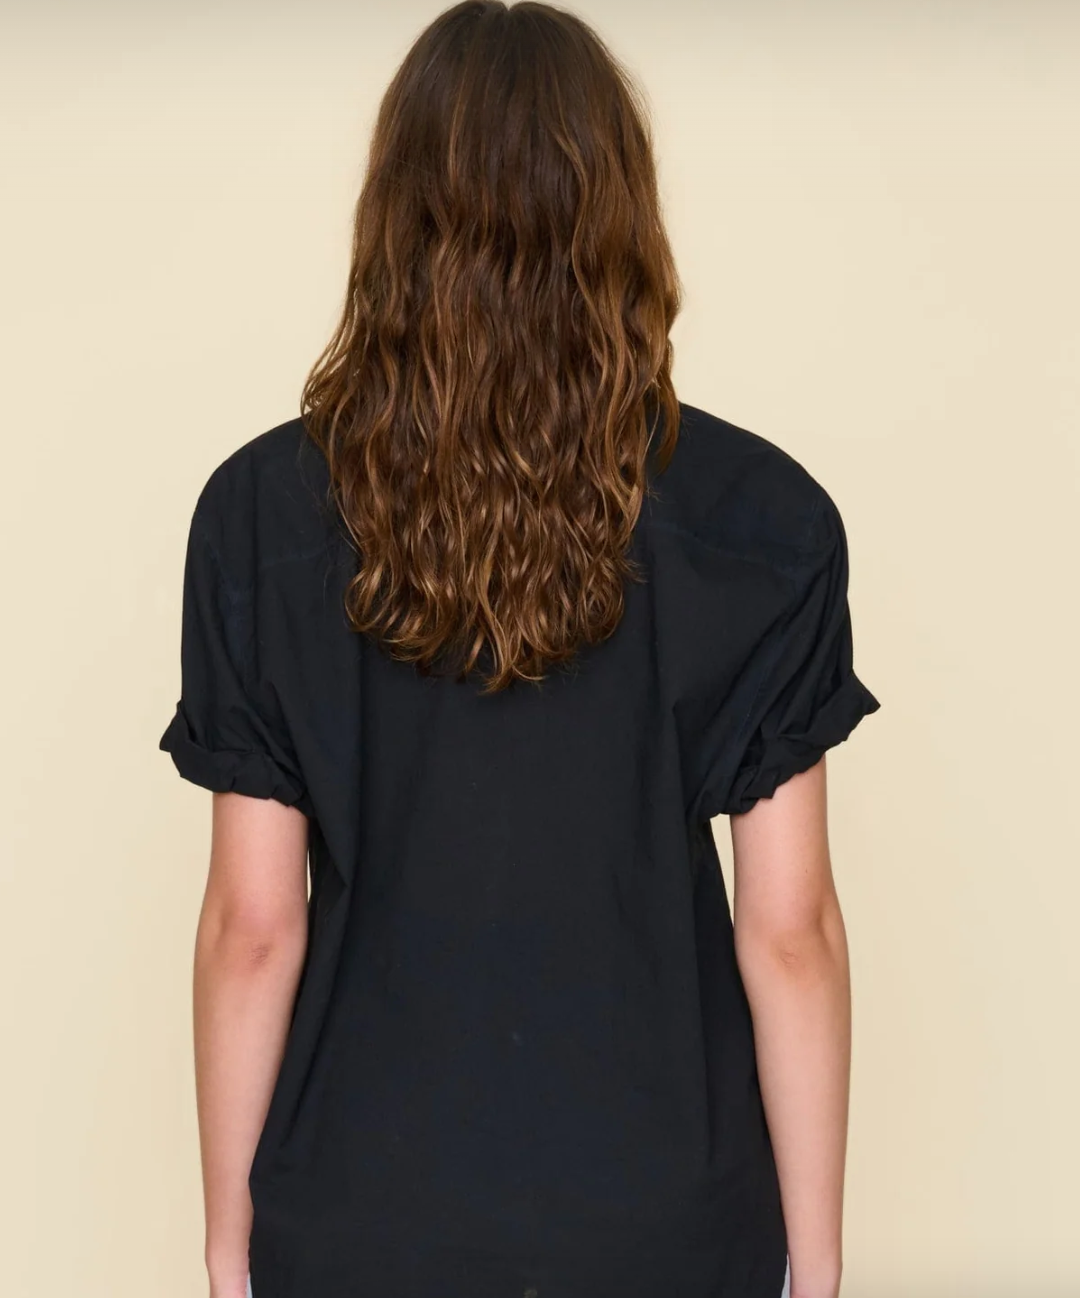 A woman with medium-length wavy brown hair, standing with her back to the camera, wearing a Xirena plain black Channing shirt against an Arizona-style beige background.